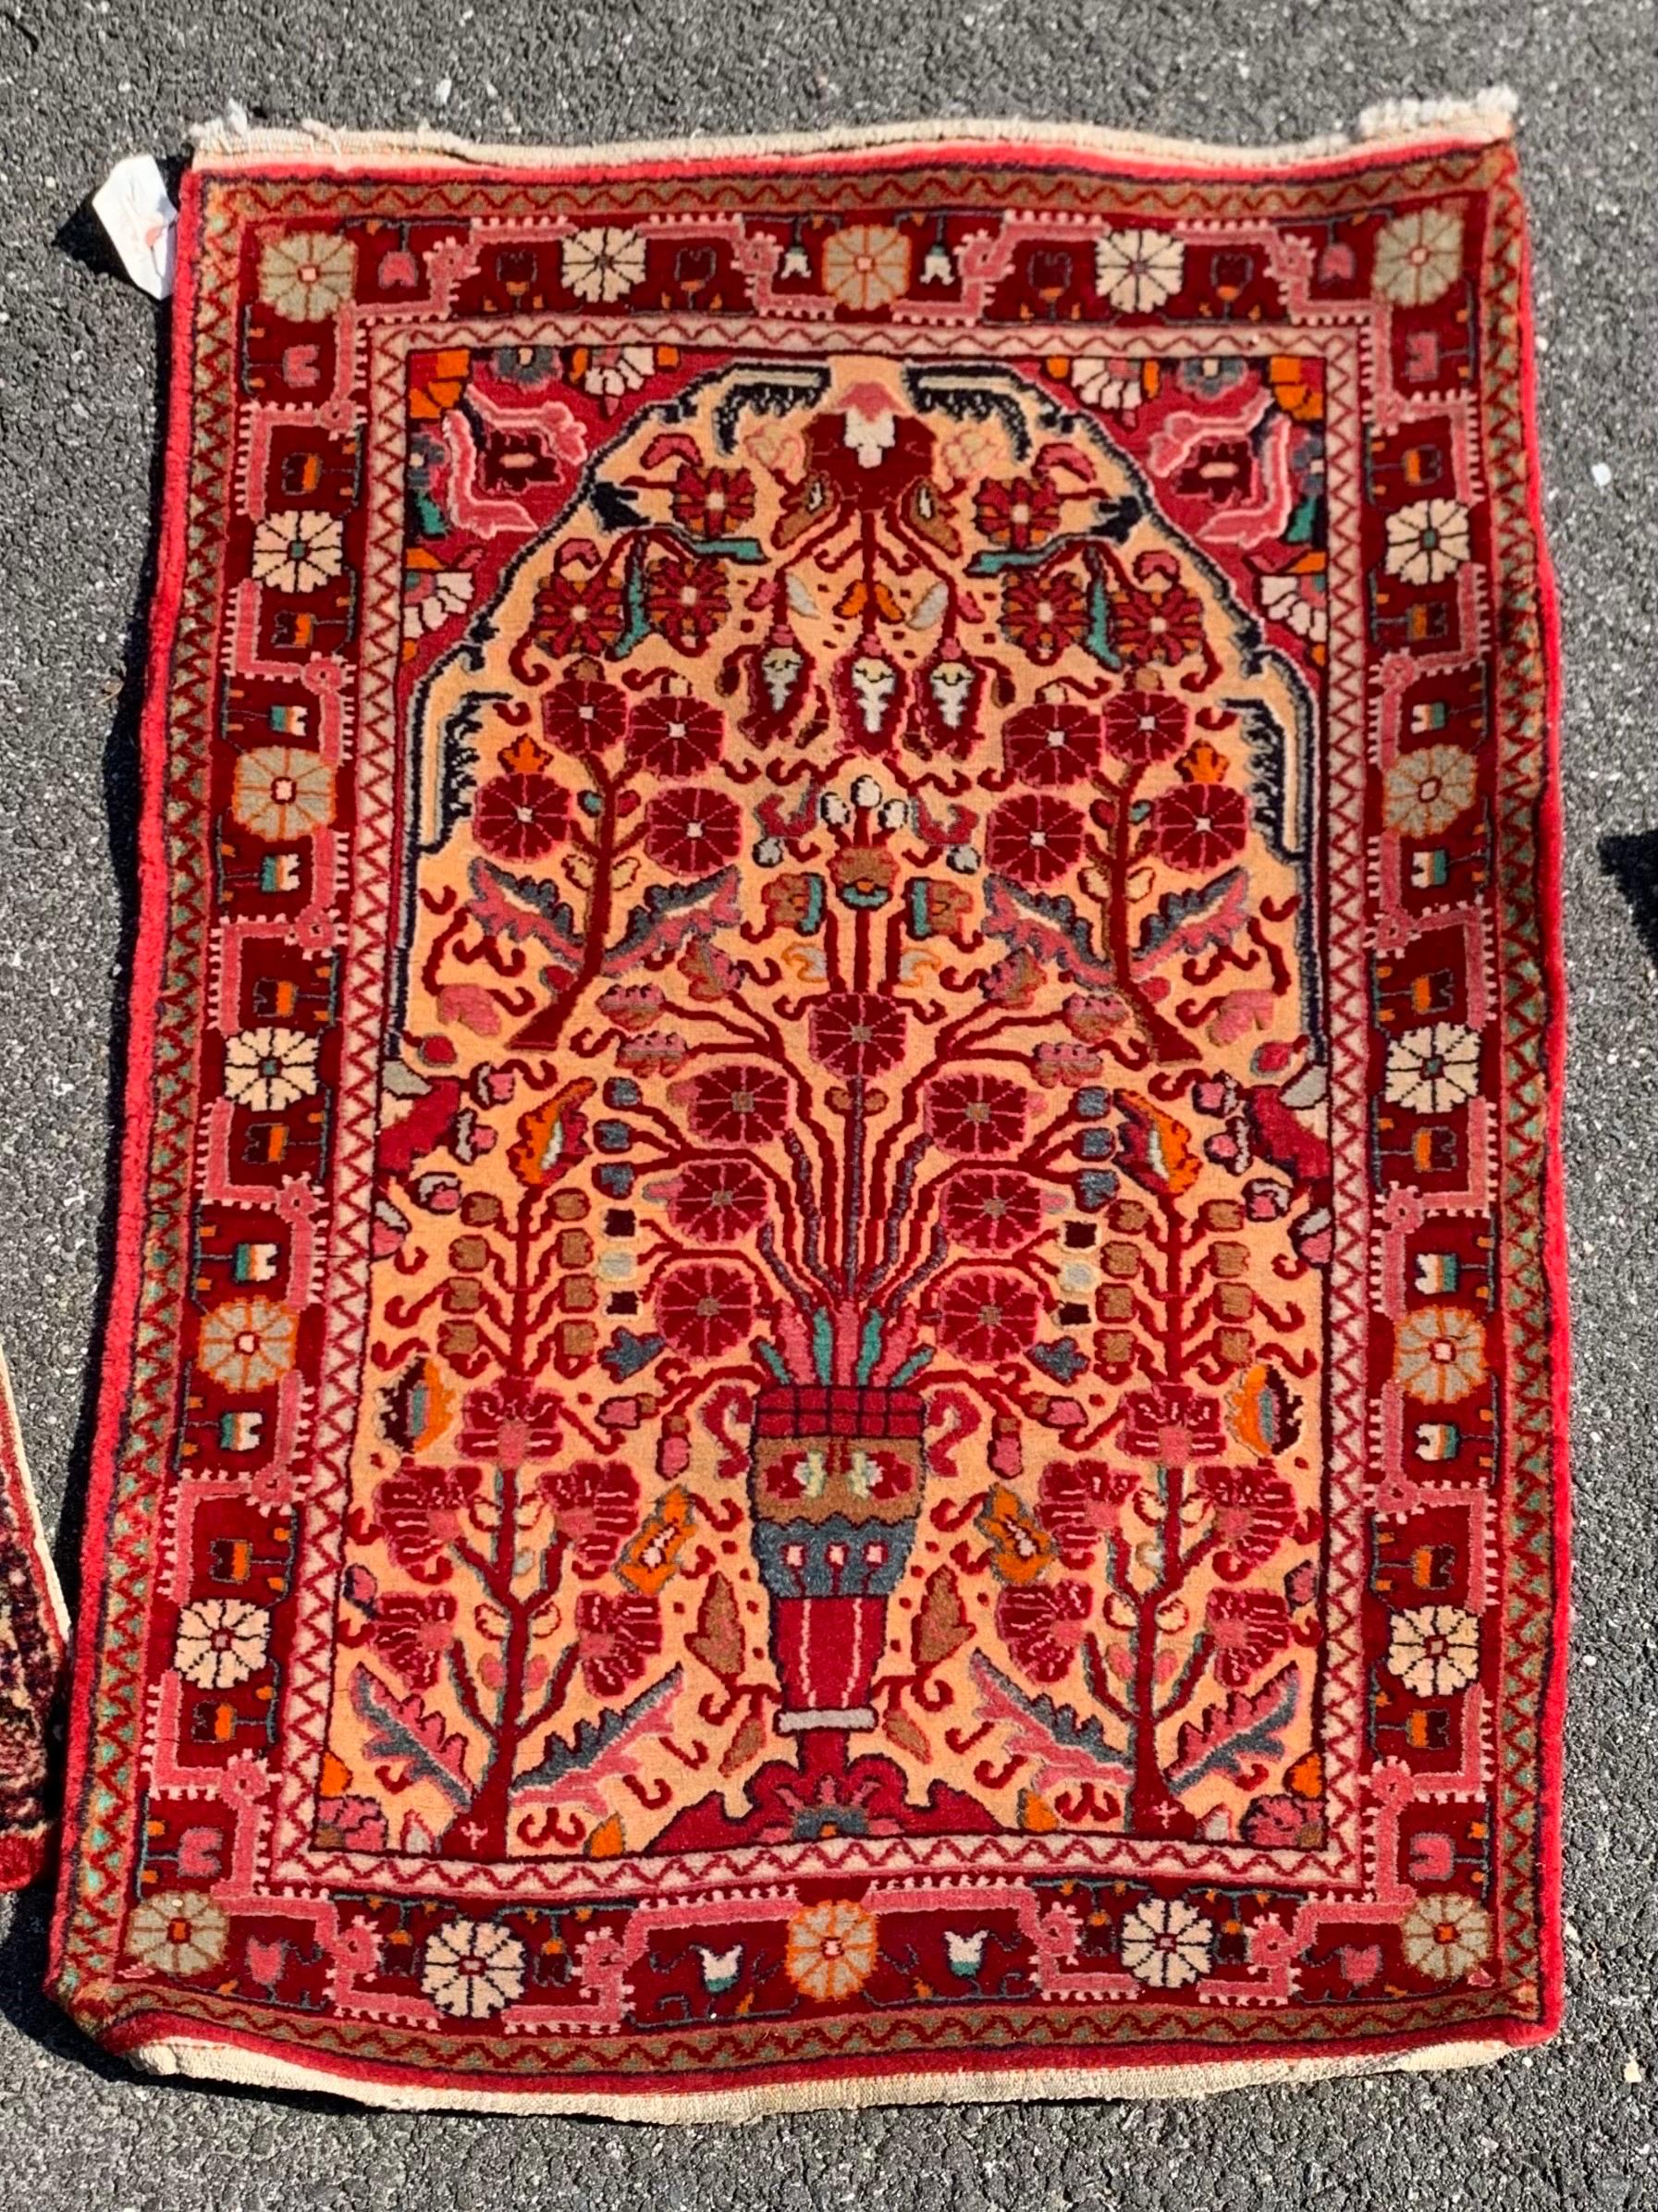 Hand-Knotted Antique Red Embroidered Sarouk Small Mini Persian Rug c. 1920s For Sale